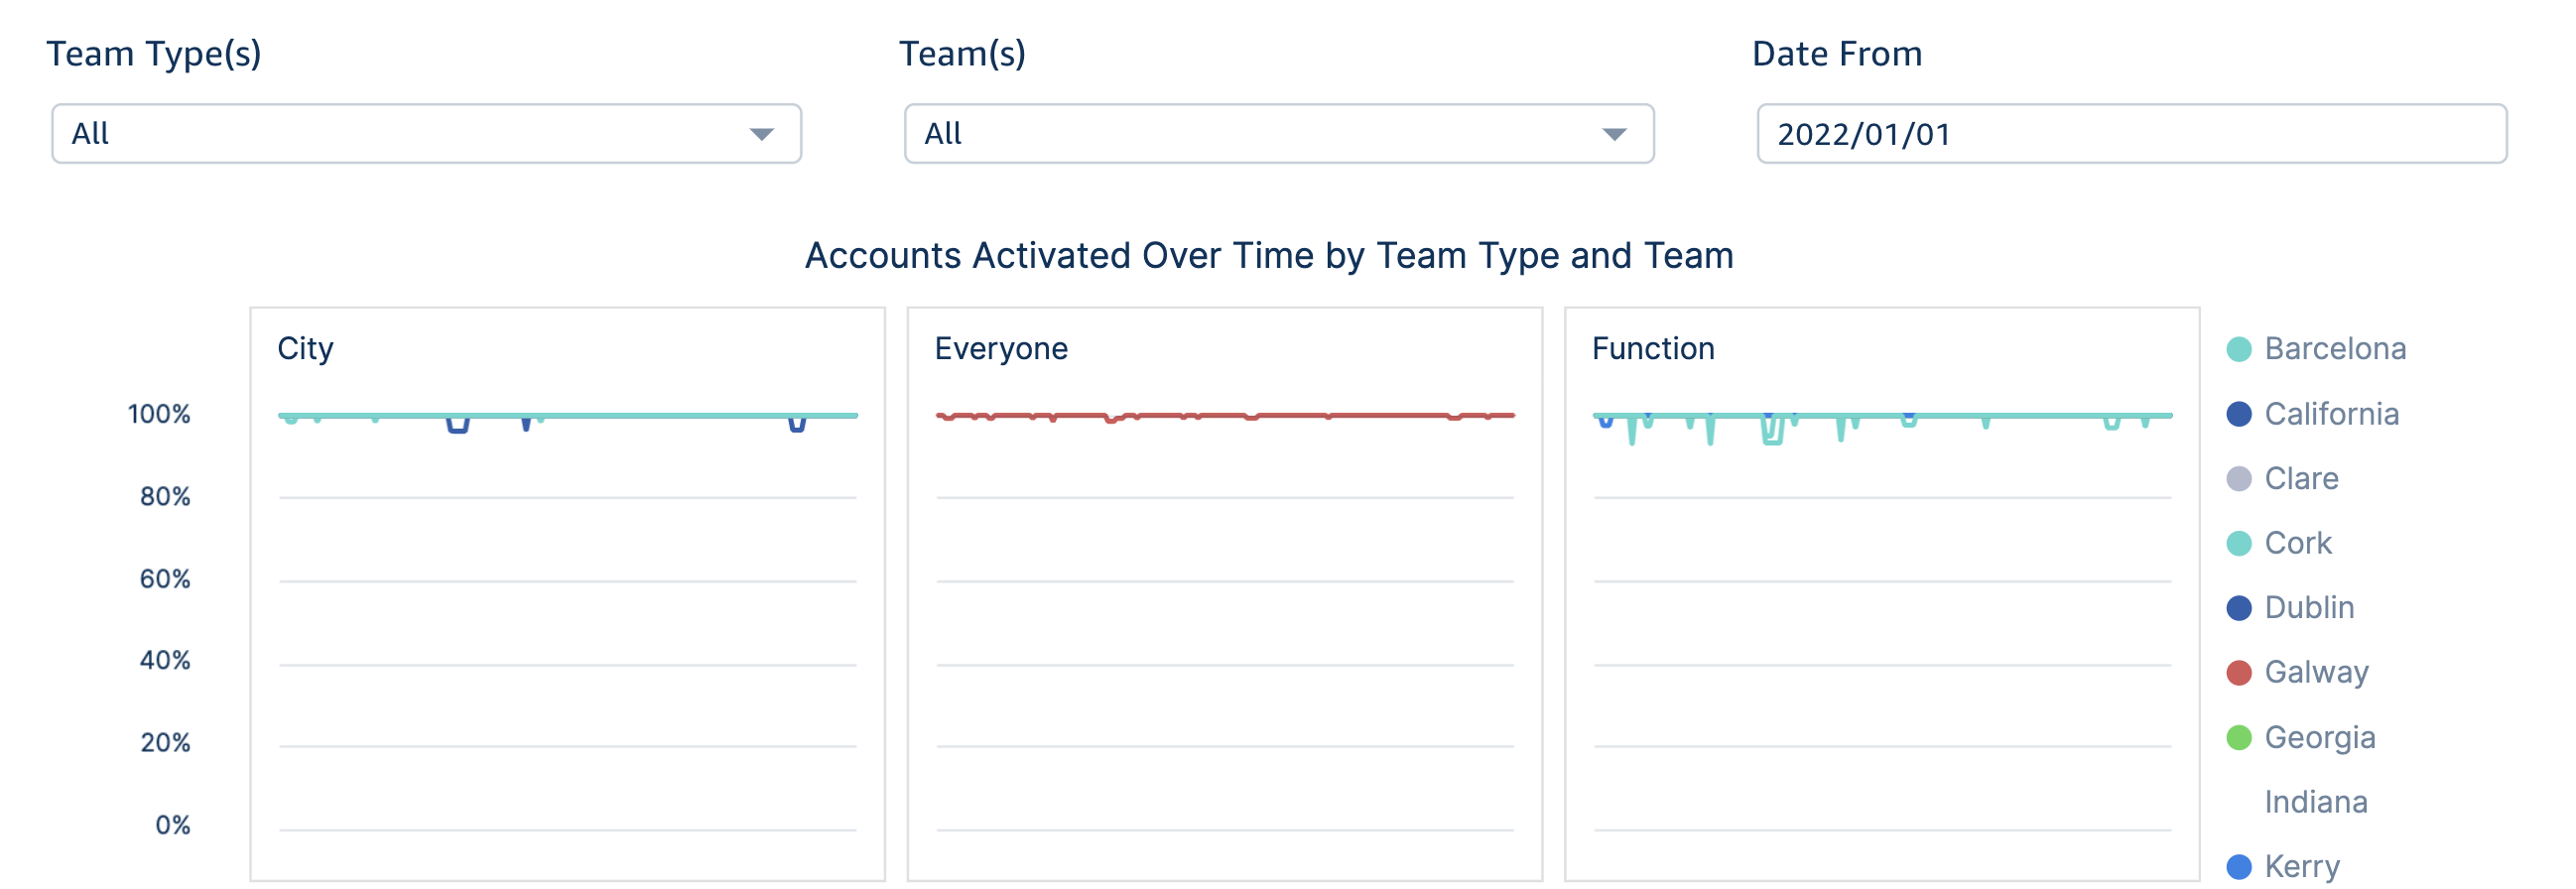 AA-Accounts_activated_over_time_by_team_type_and_team.png